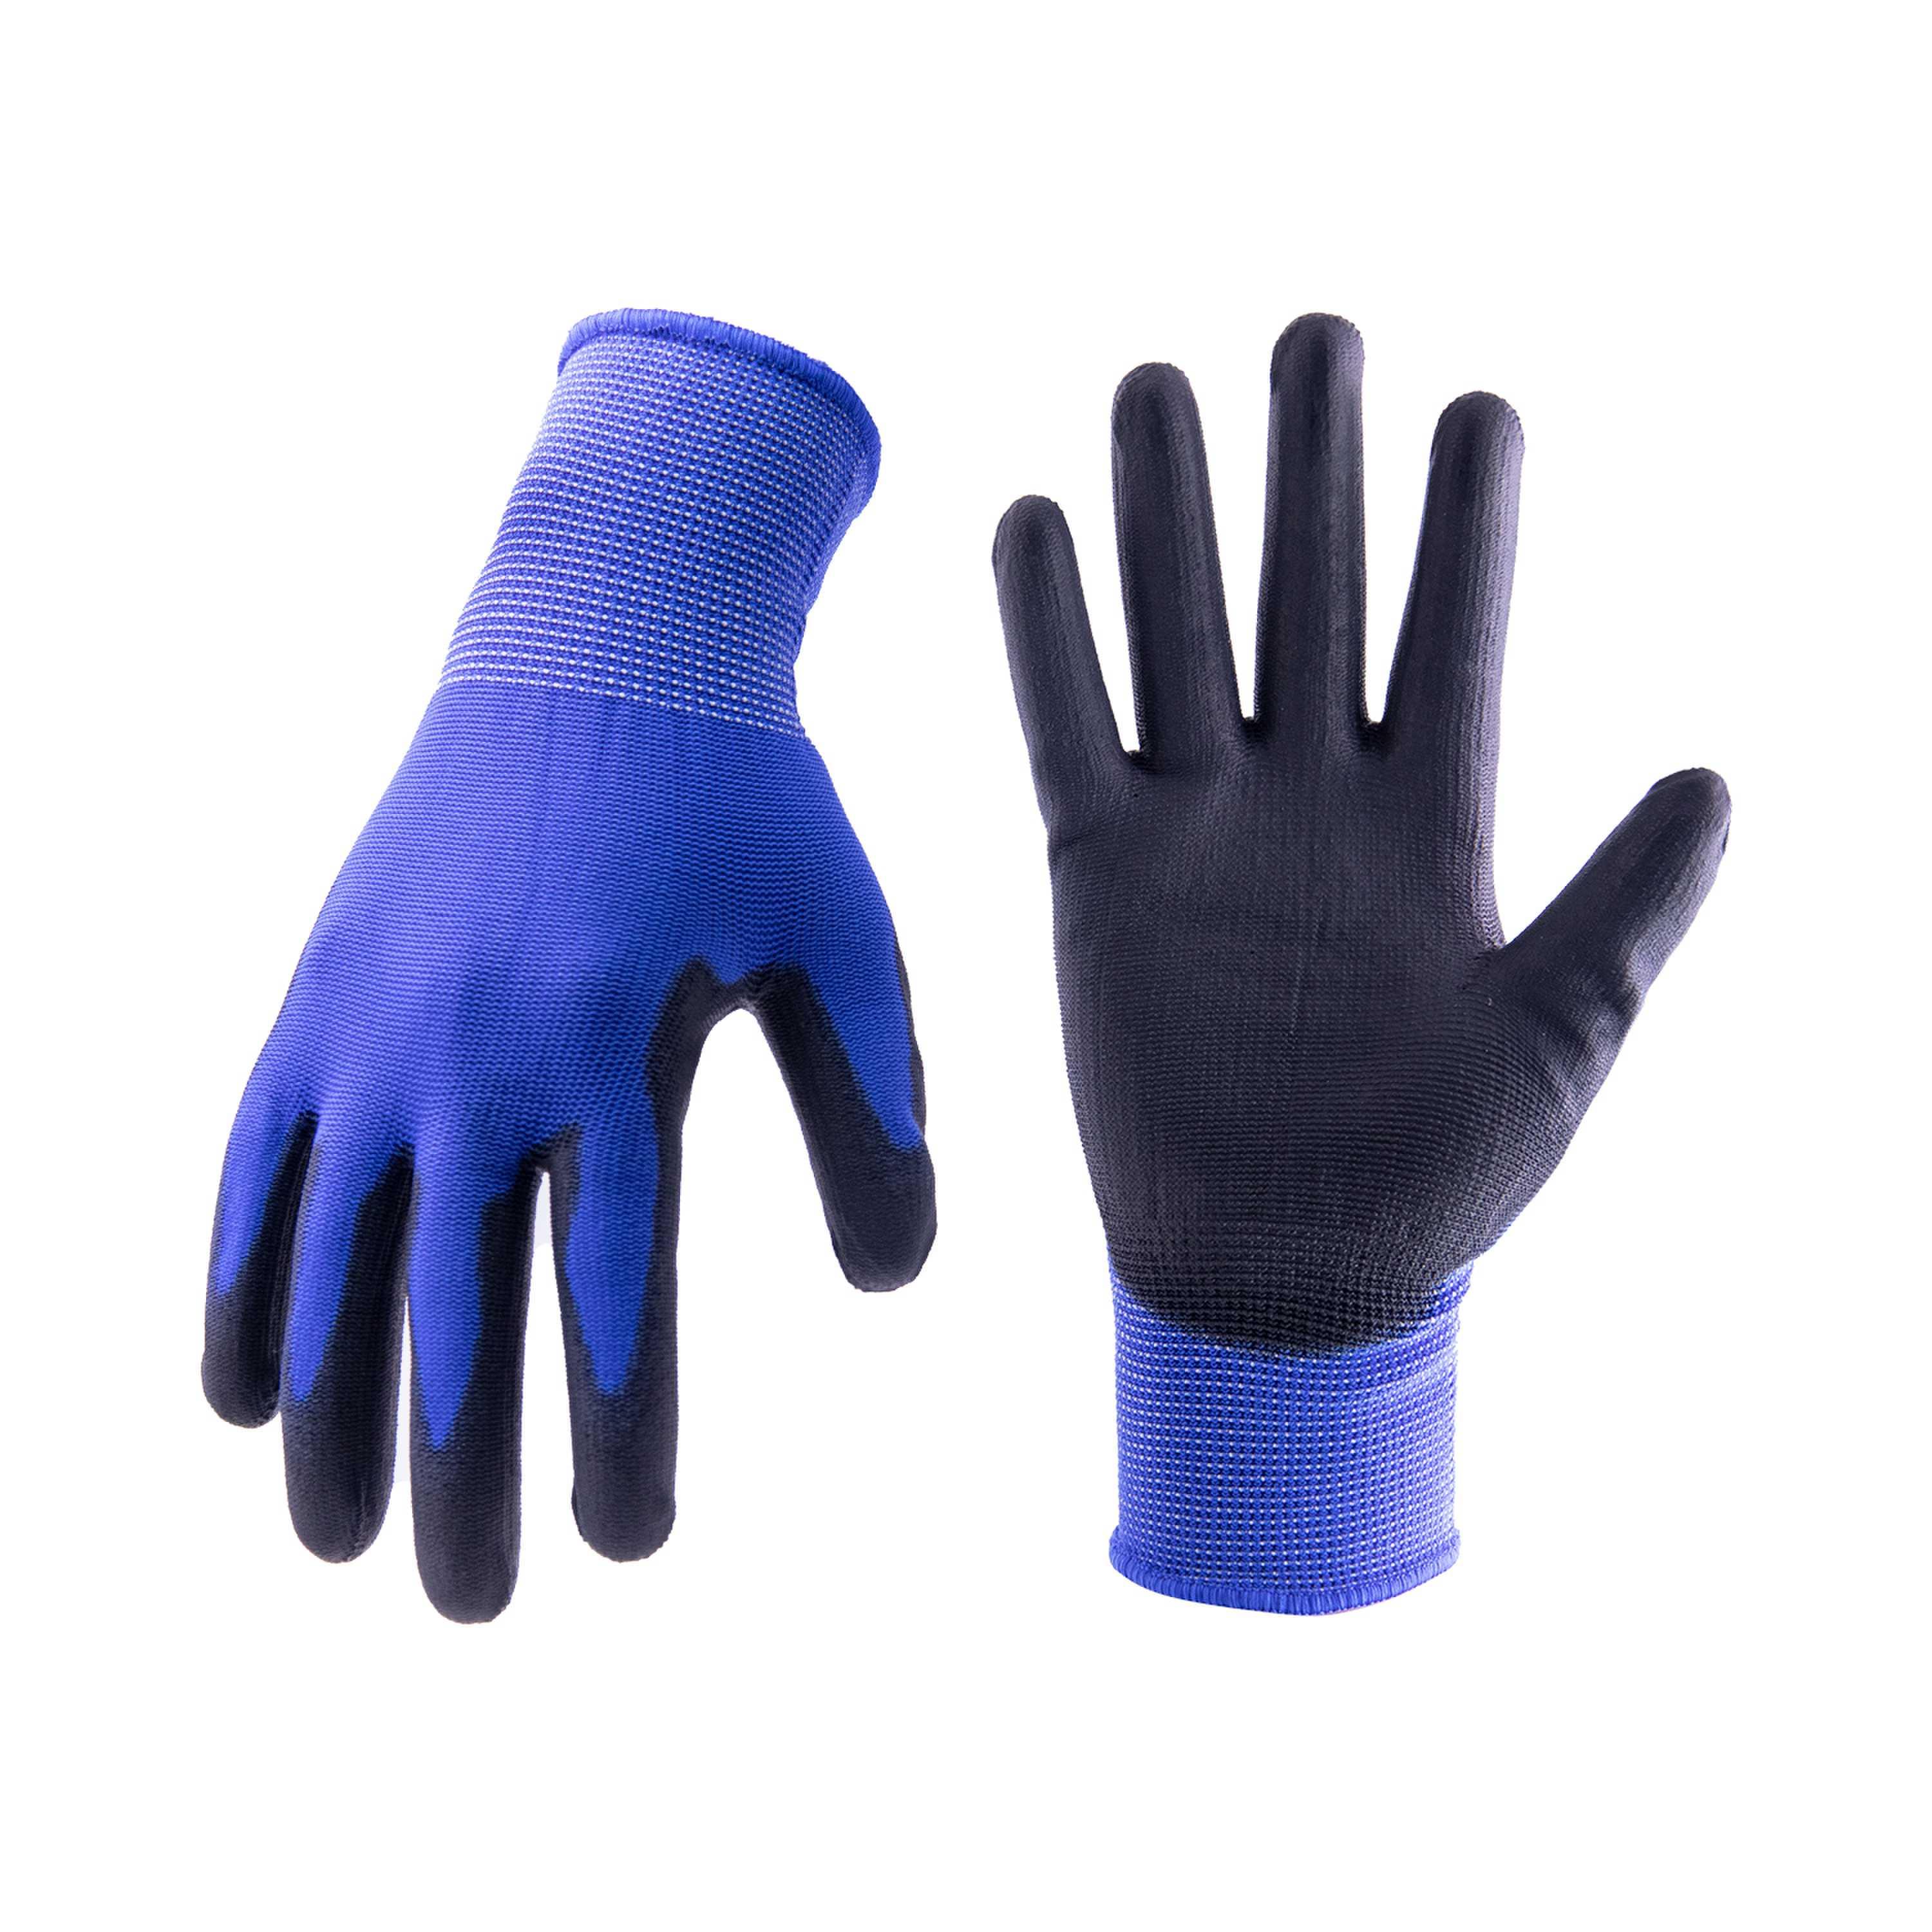 PRISAFETY-Export on gloves manufacture for more than 20 years.